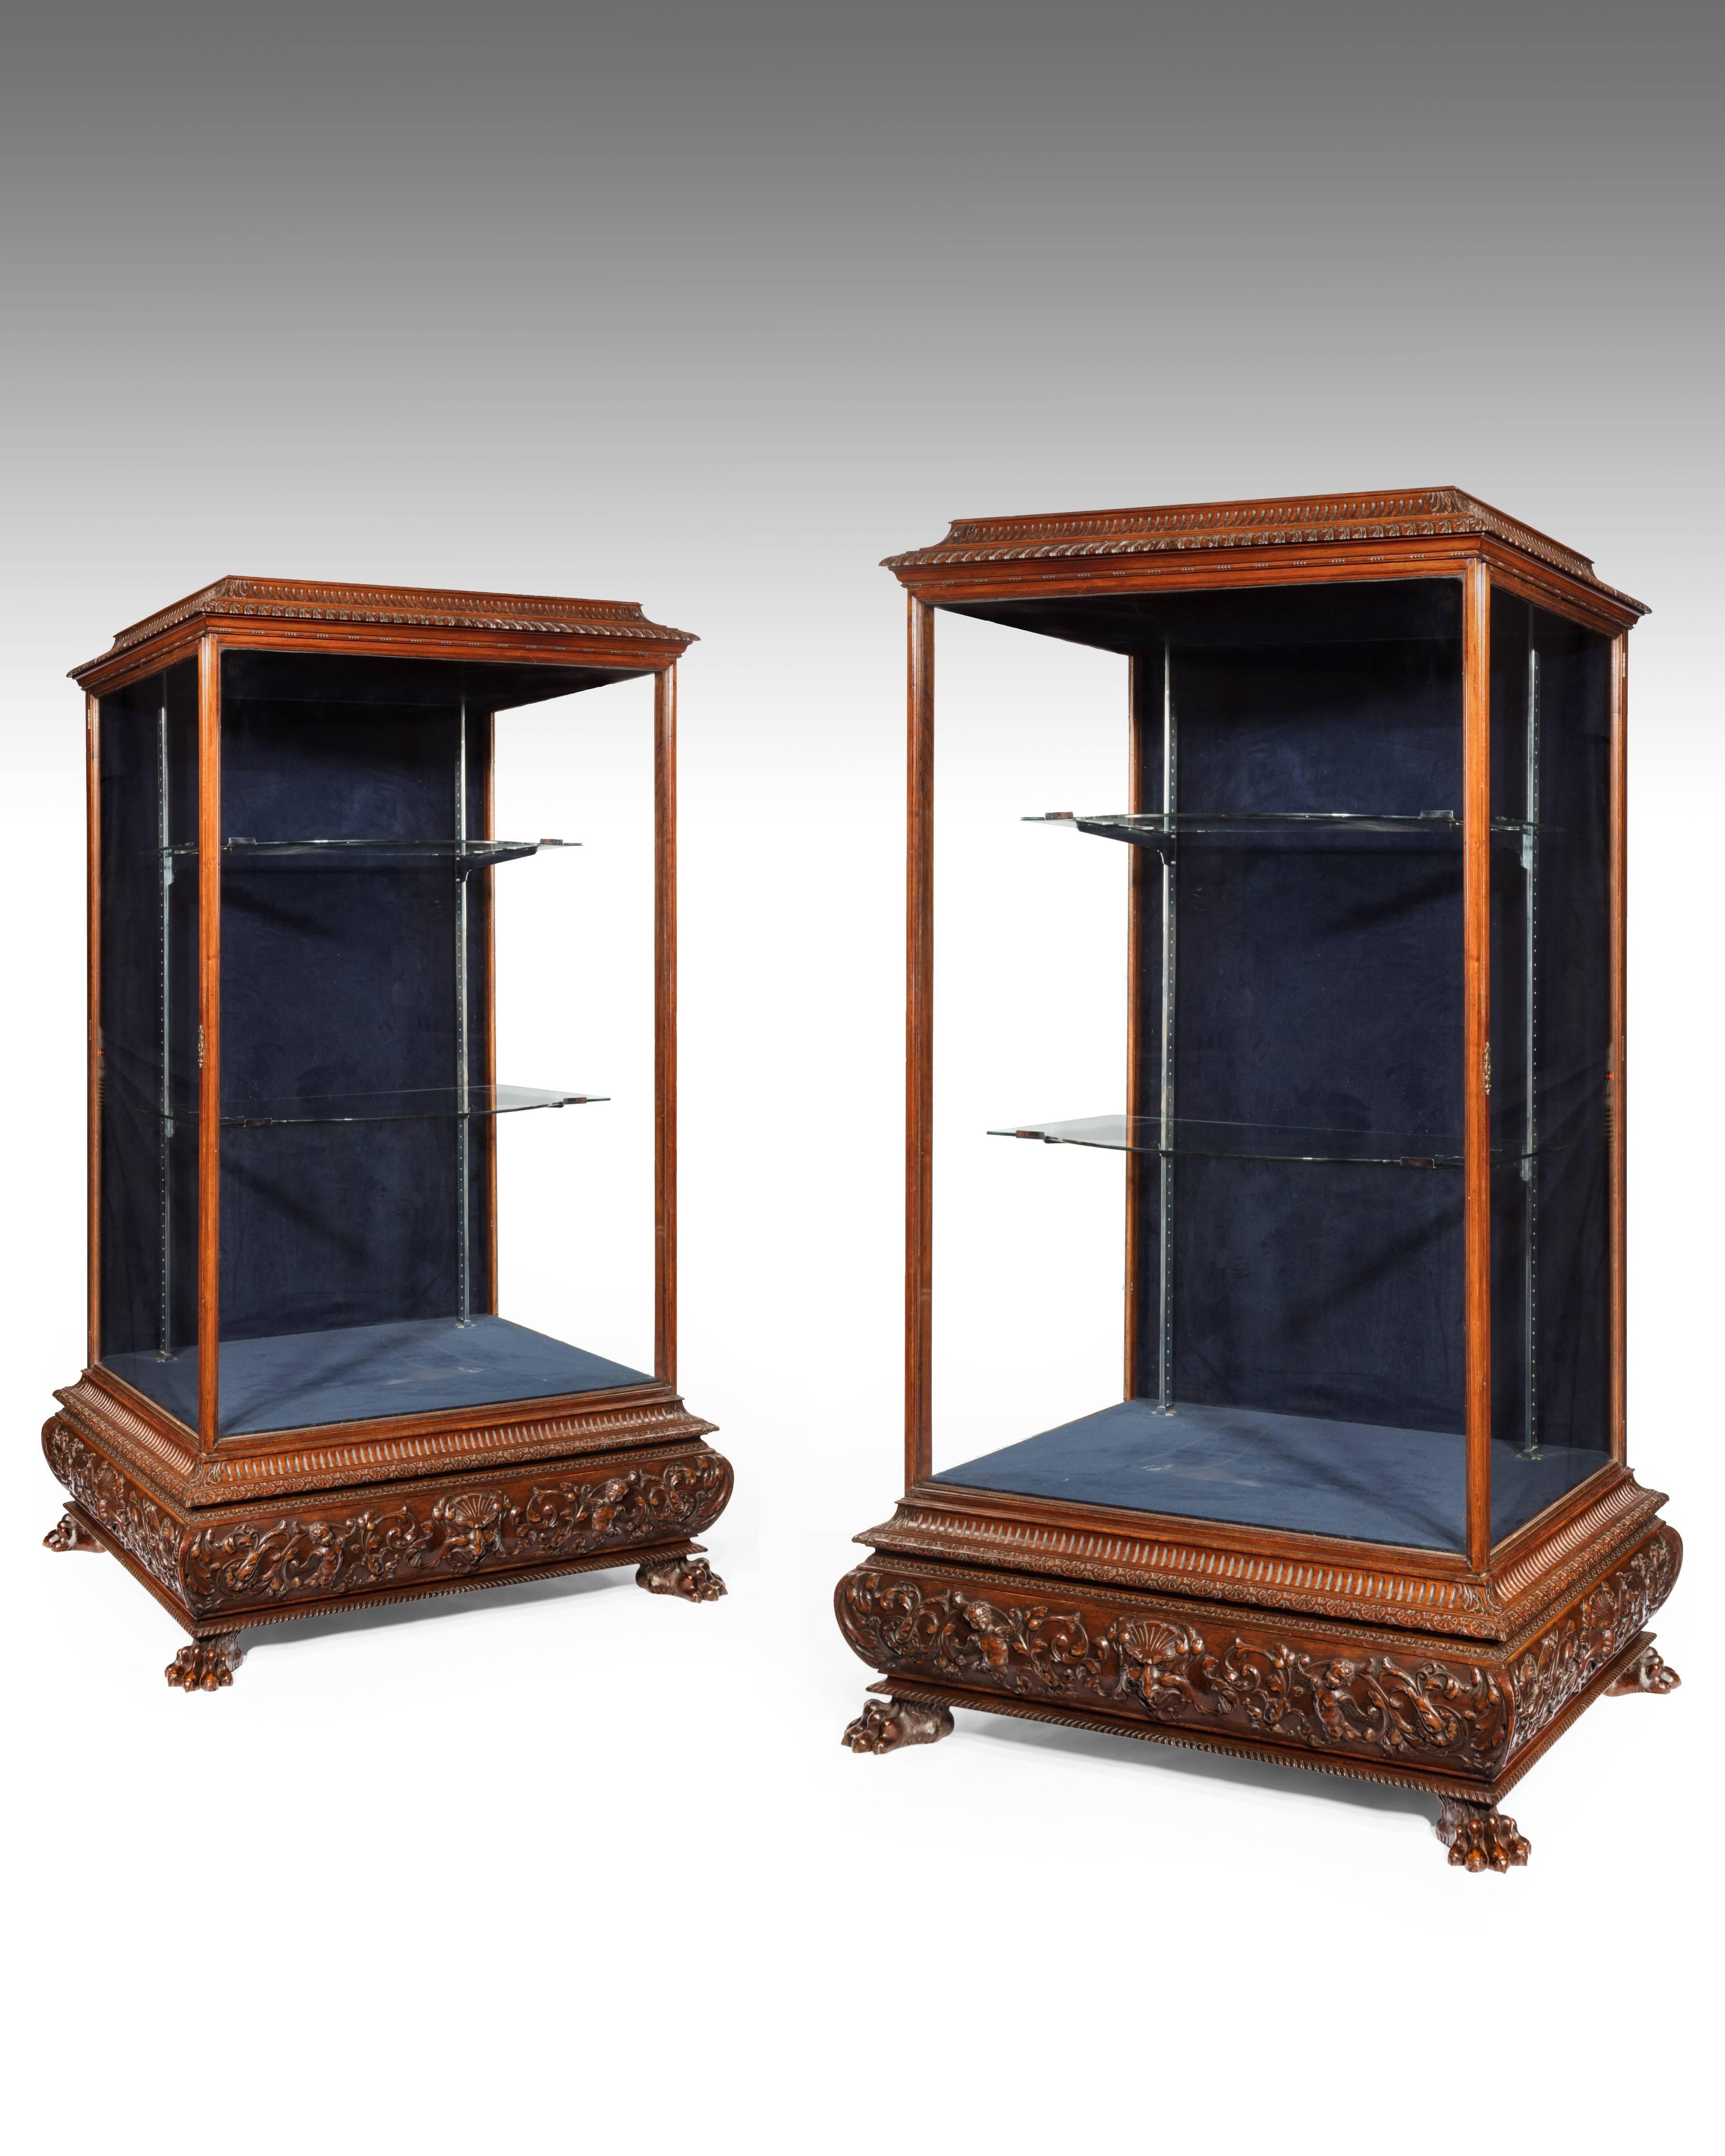 A Magnificent pair of large 19th century walnut display trophy cabinets, circa 1860.
This wonderful and extremely rare pair of cabinets are of large proportions being almost 7ft high. 
The carved and fluted pagoda tops sit above three glazed